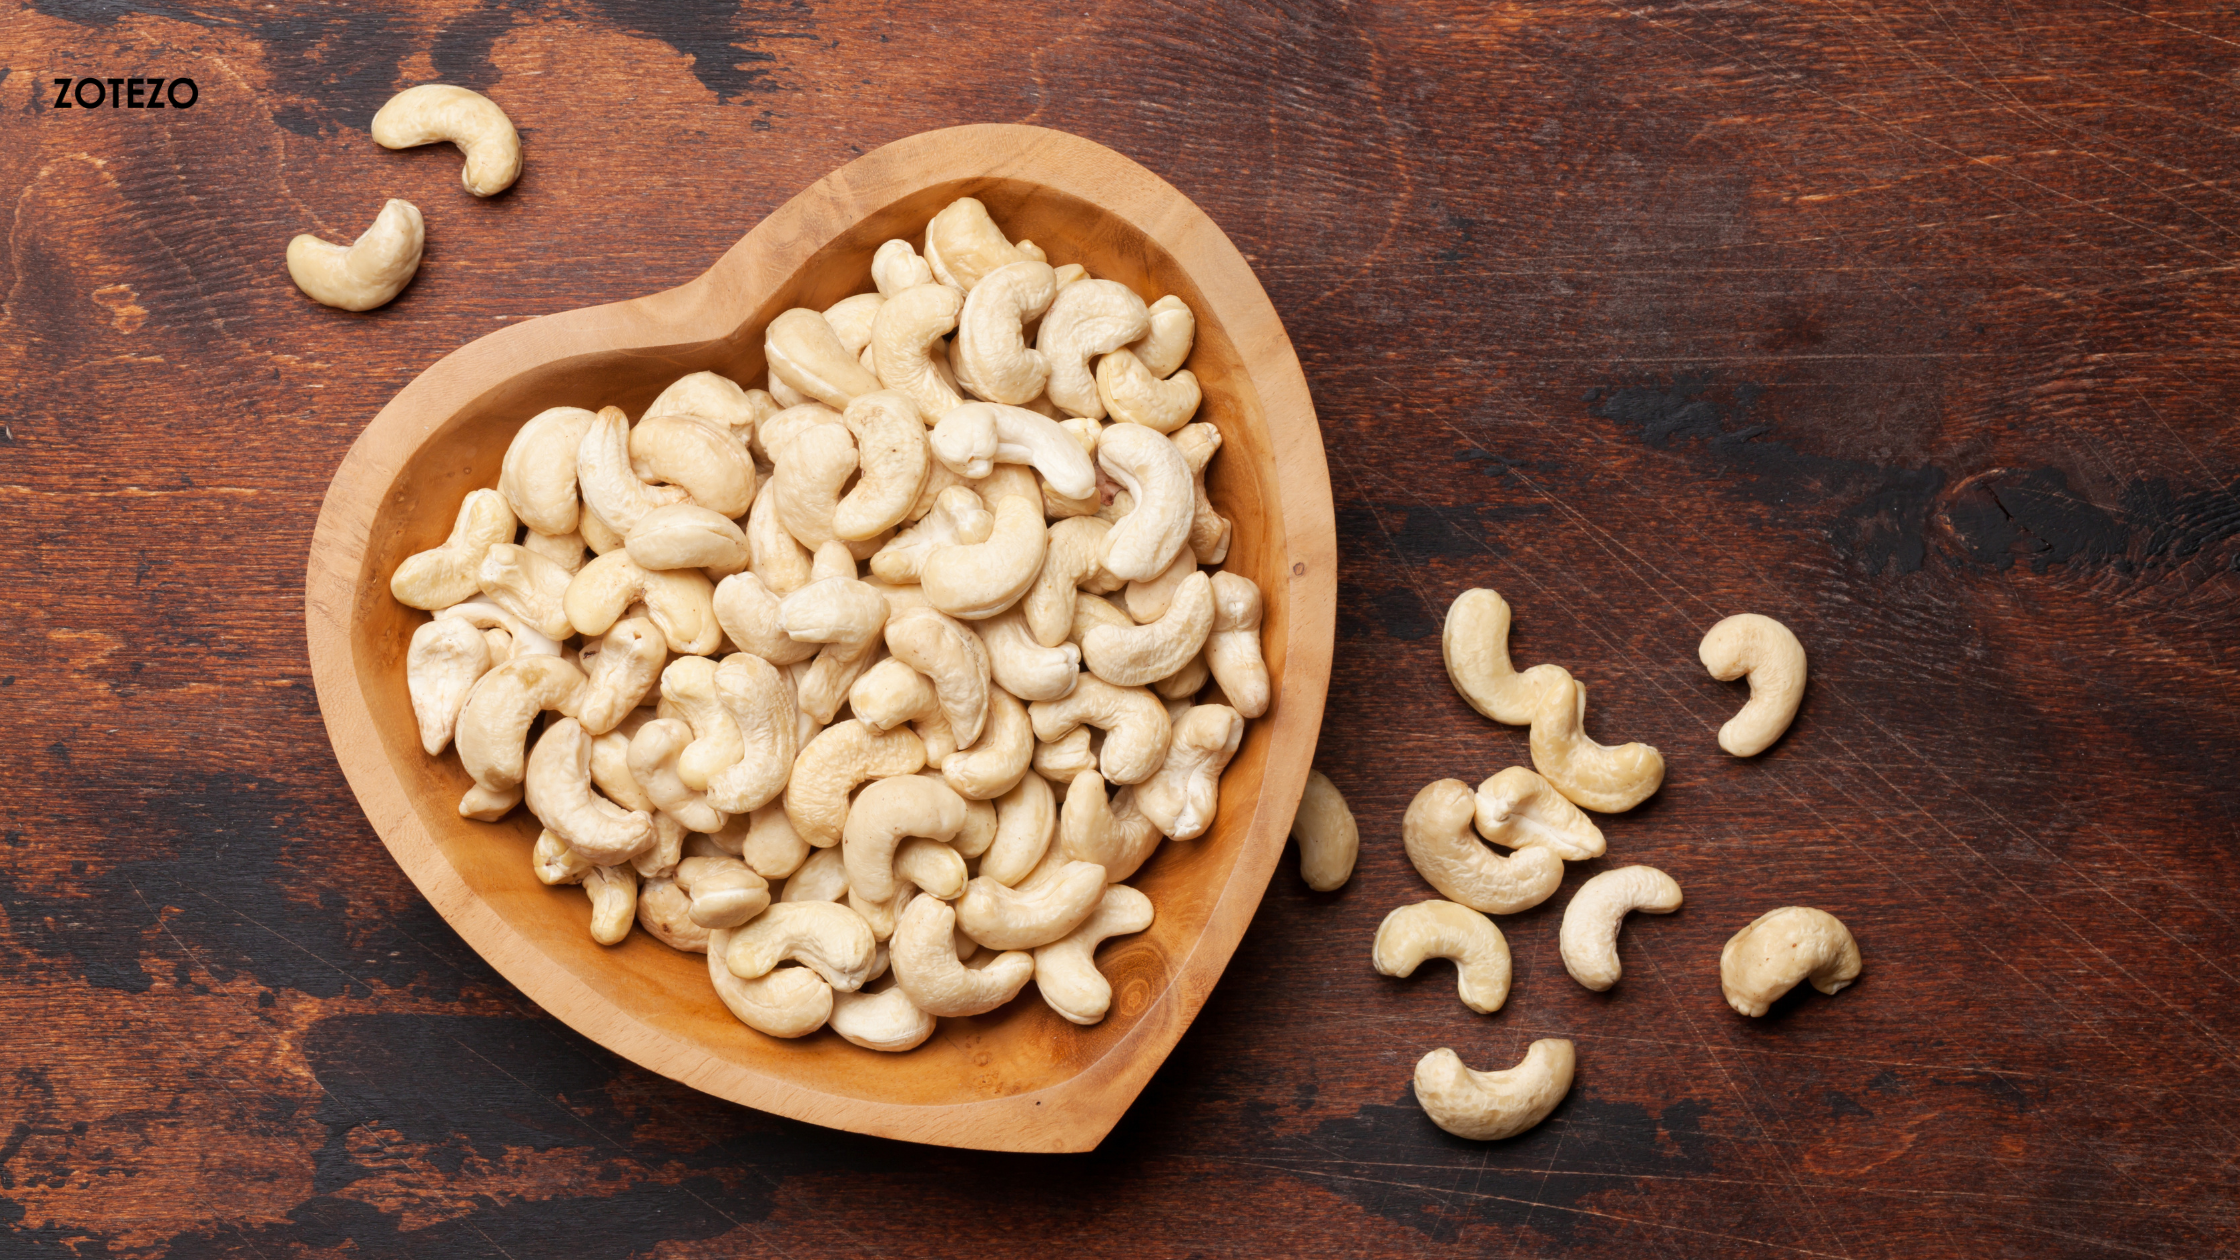 Cashew in the World